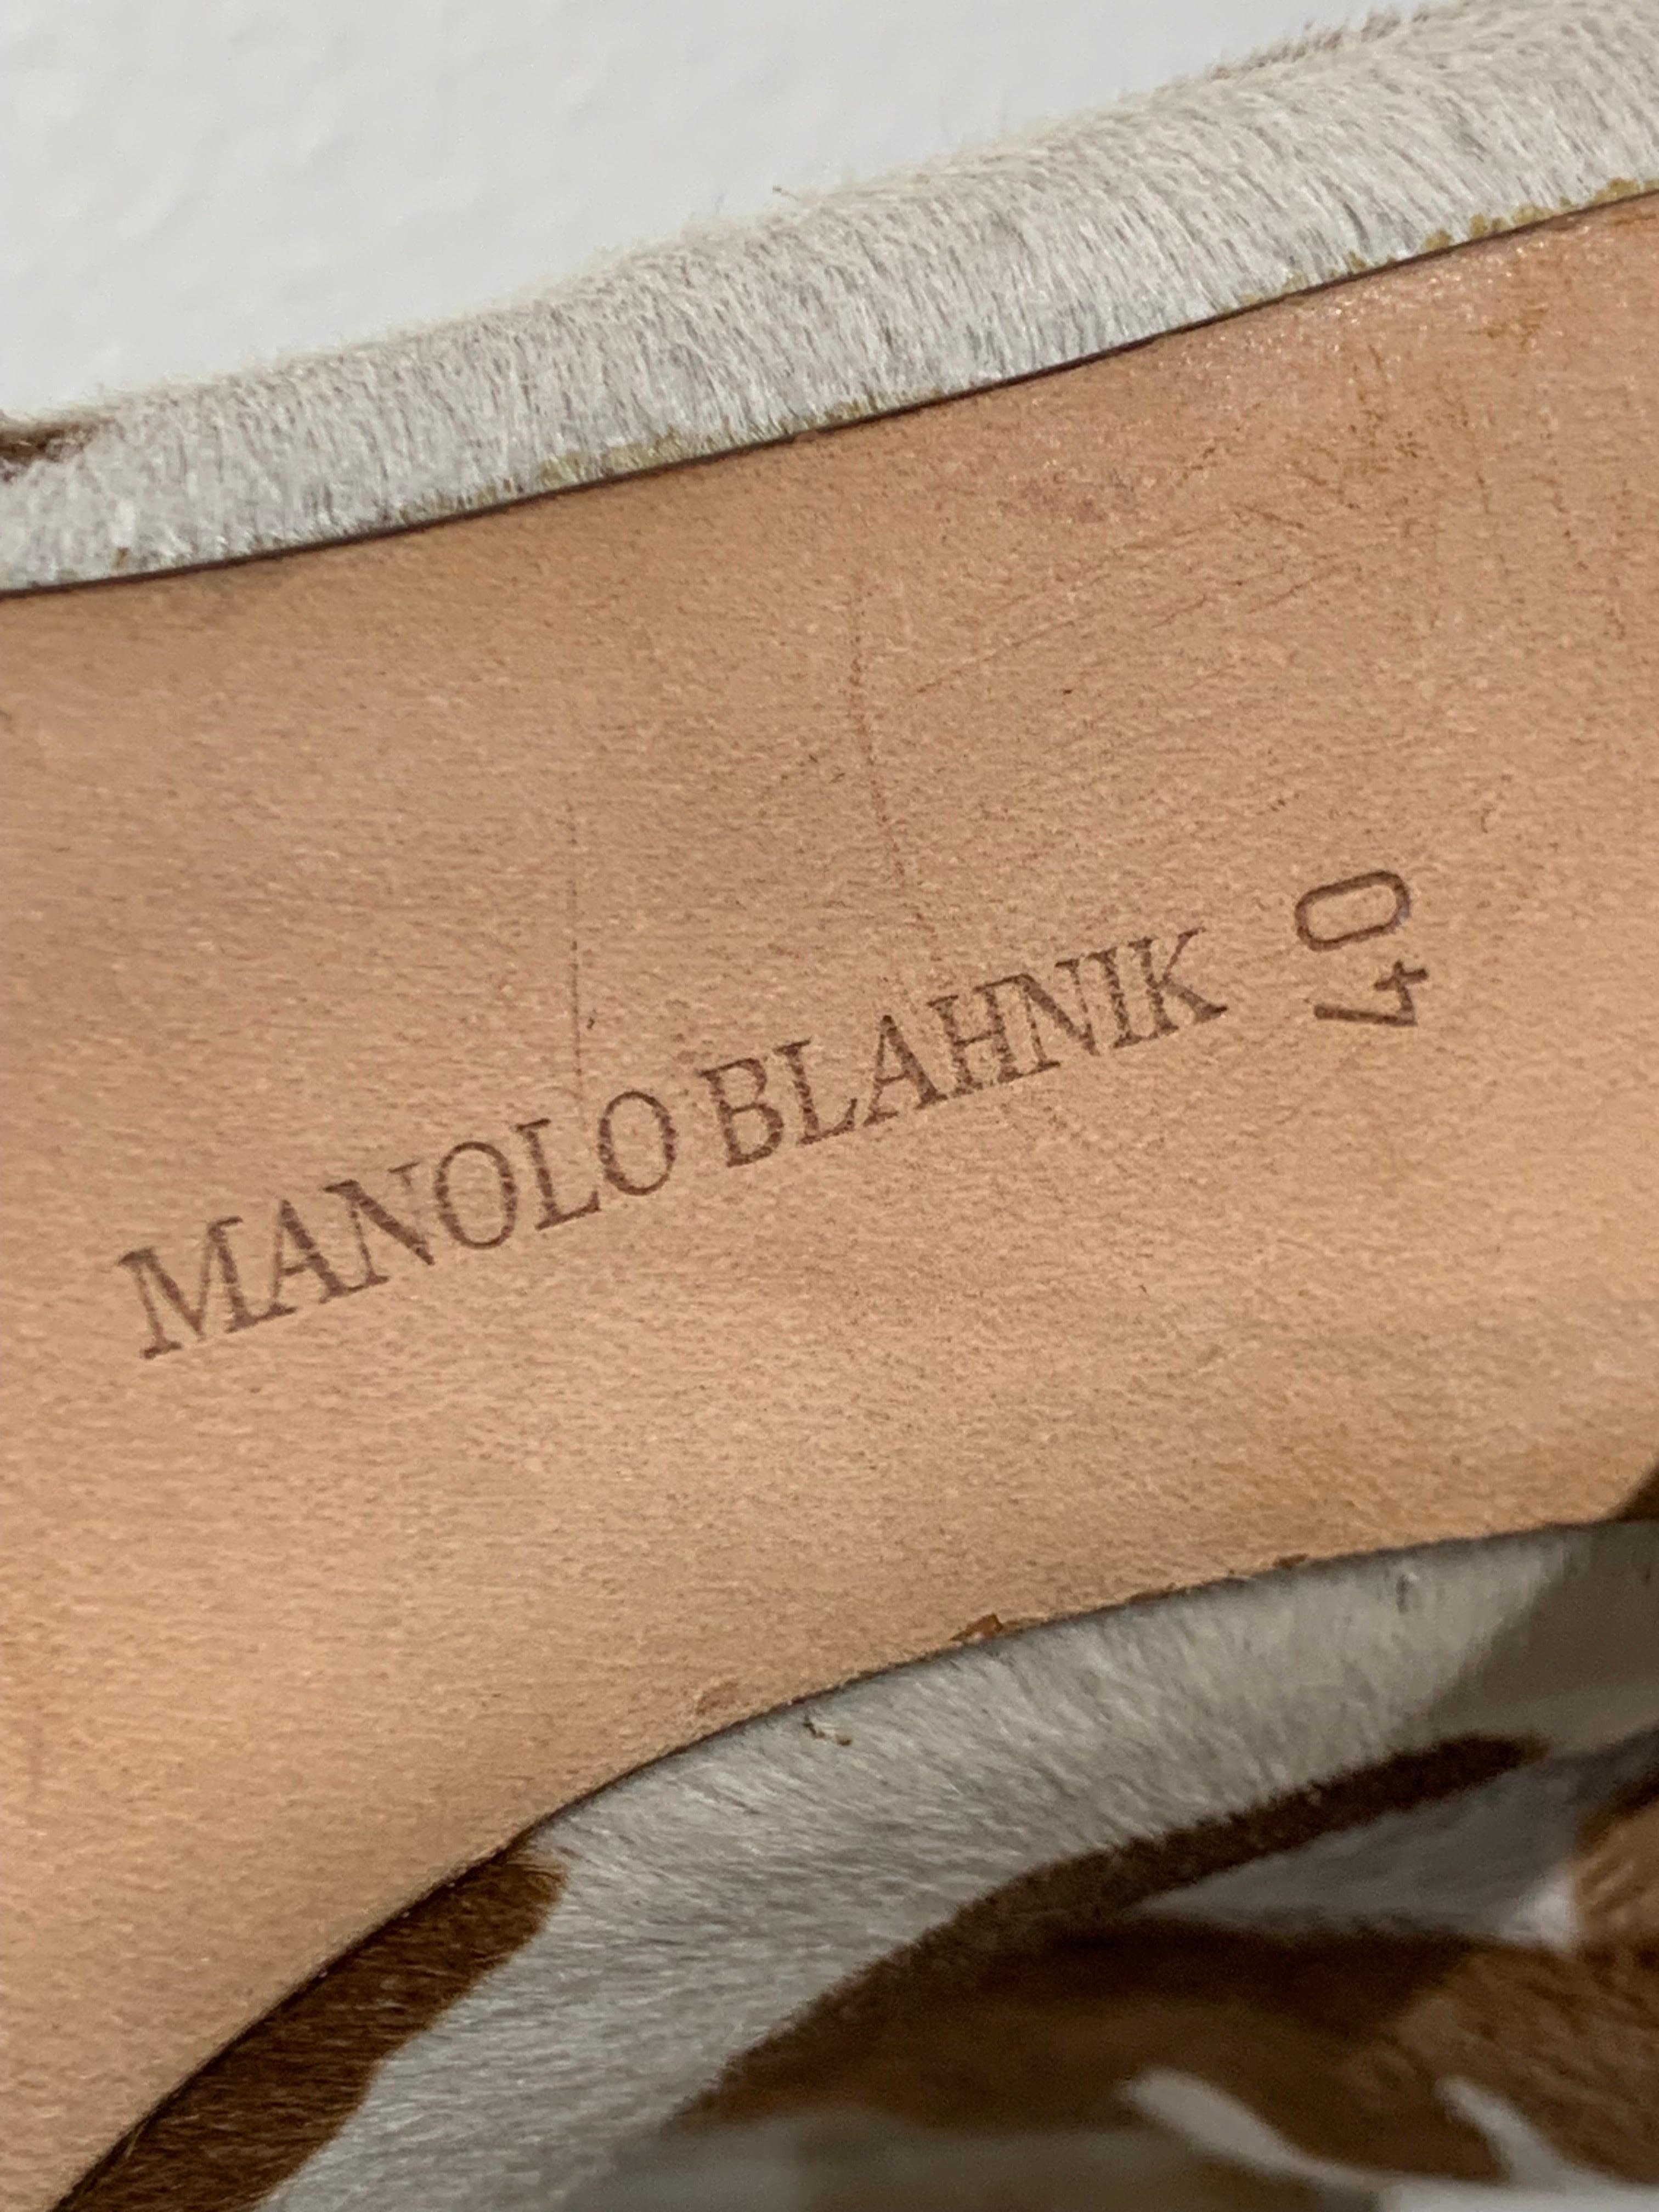 Manolo Blahnik Brown & White Cow Print Leather Knee-High Stiletto Heel Boots For Sale 6